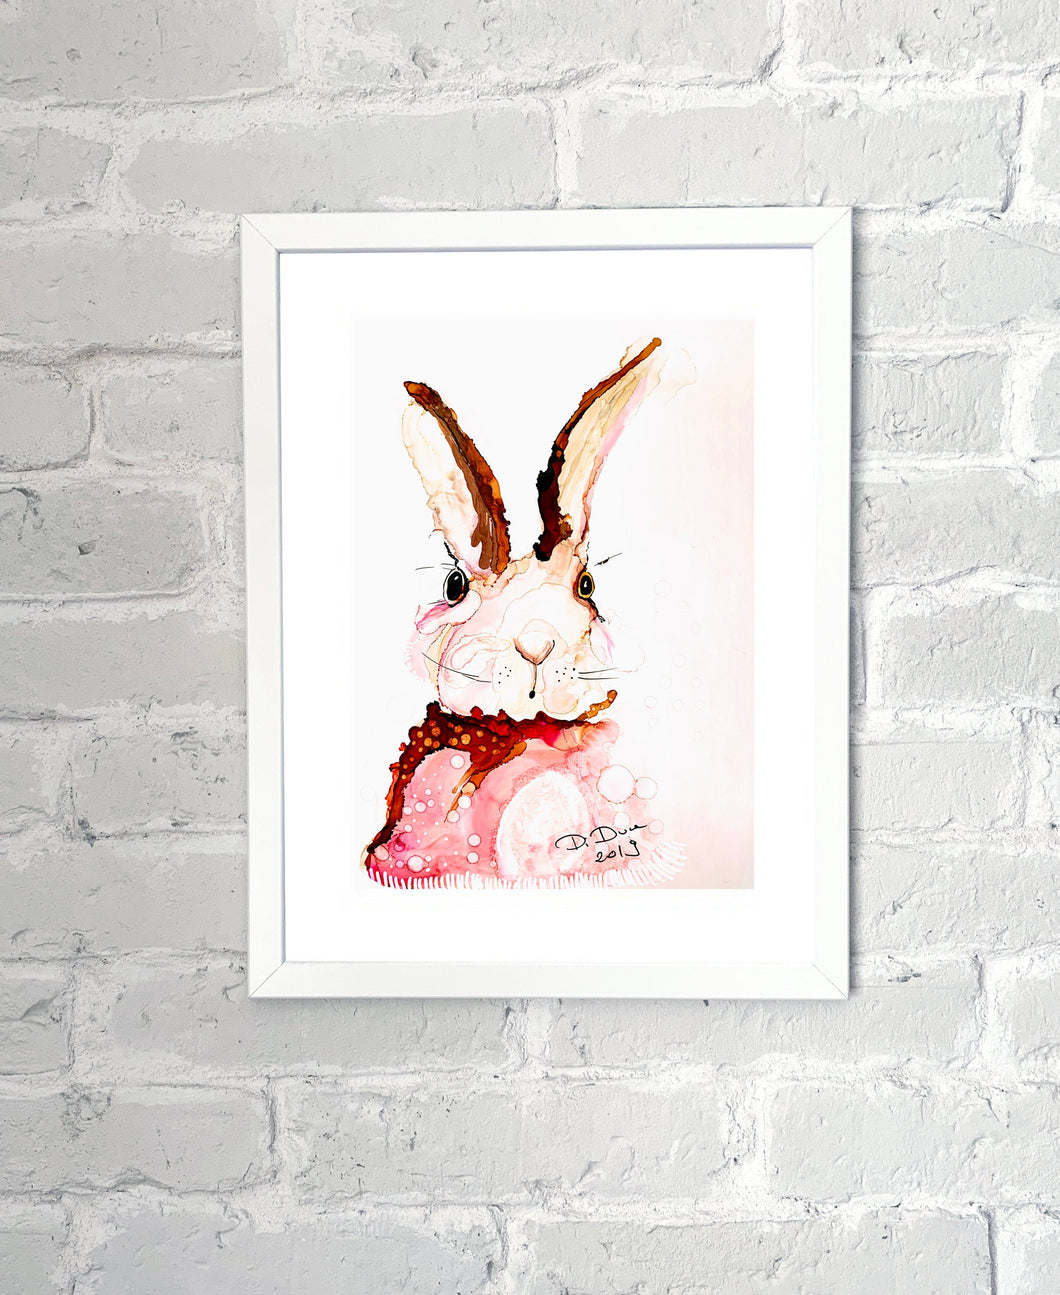 Little Bunny - Alcohol Ink Painting on Yupo Paper